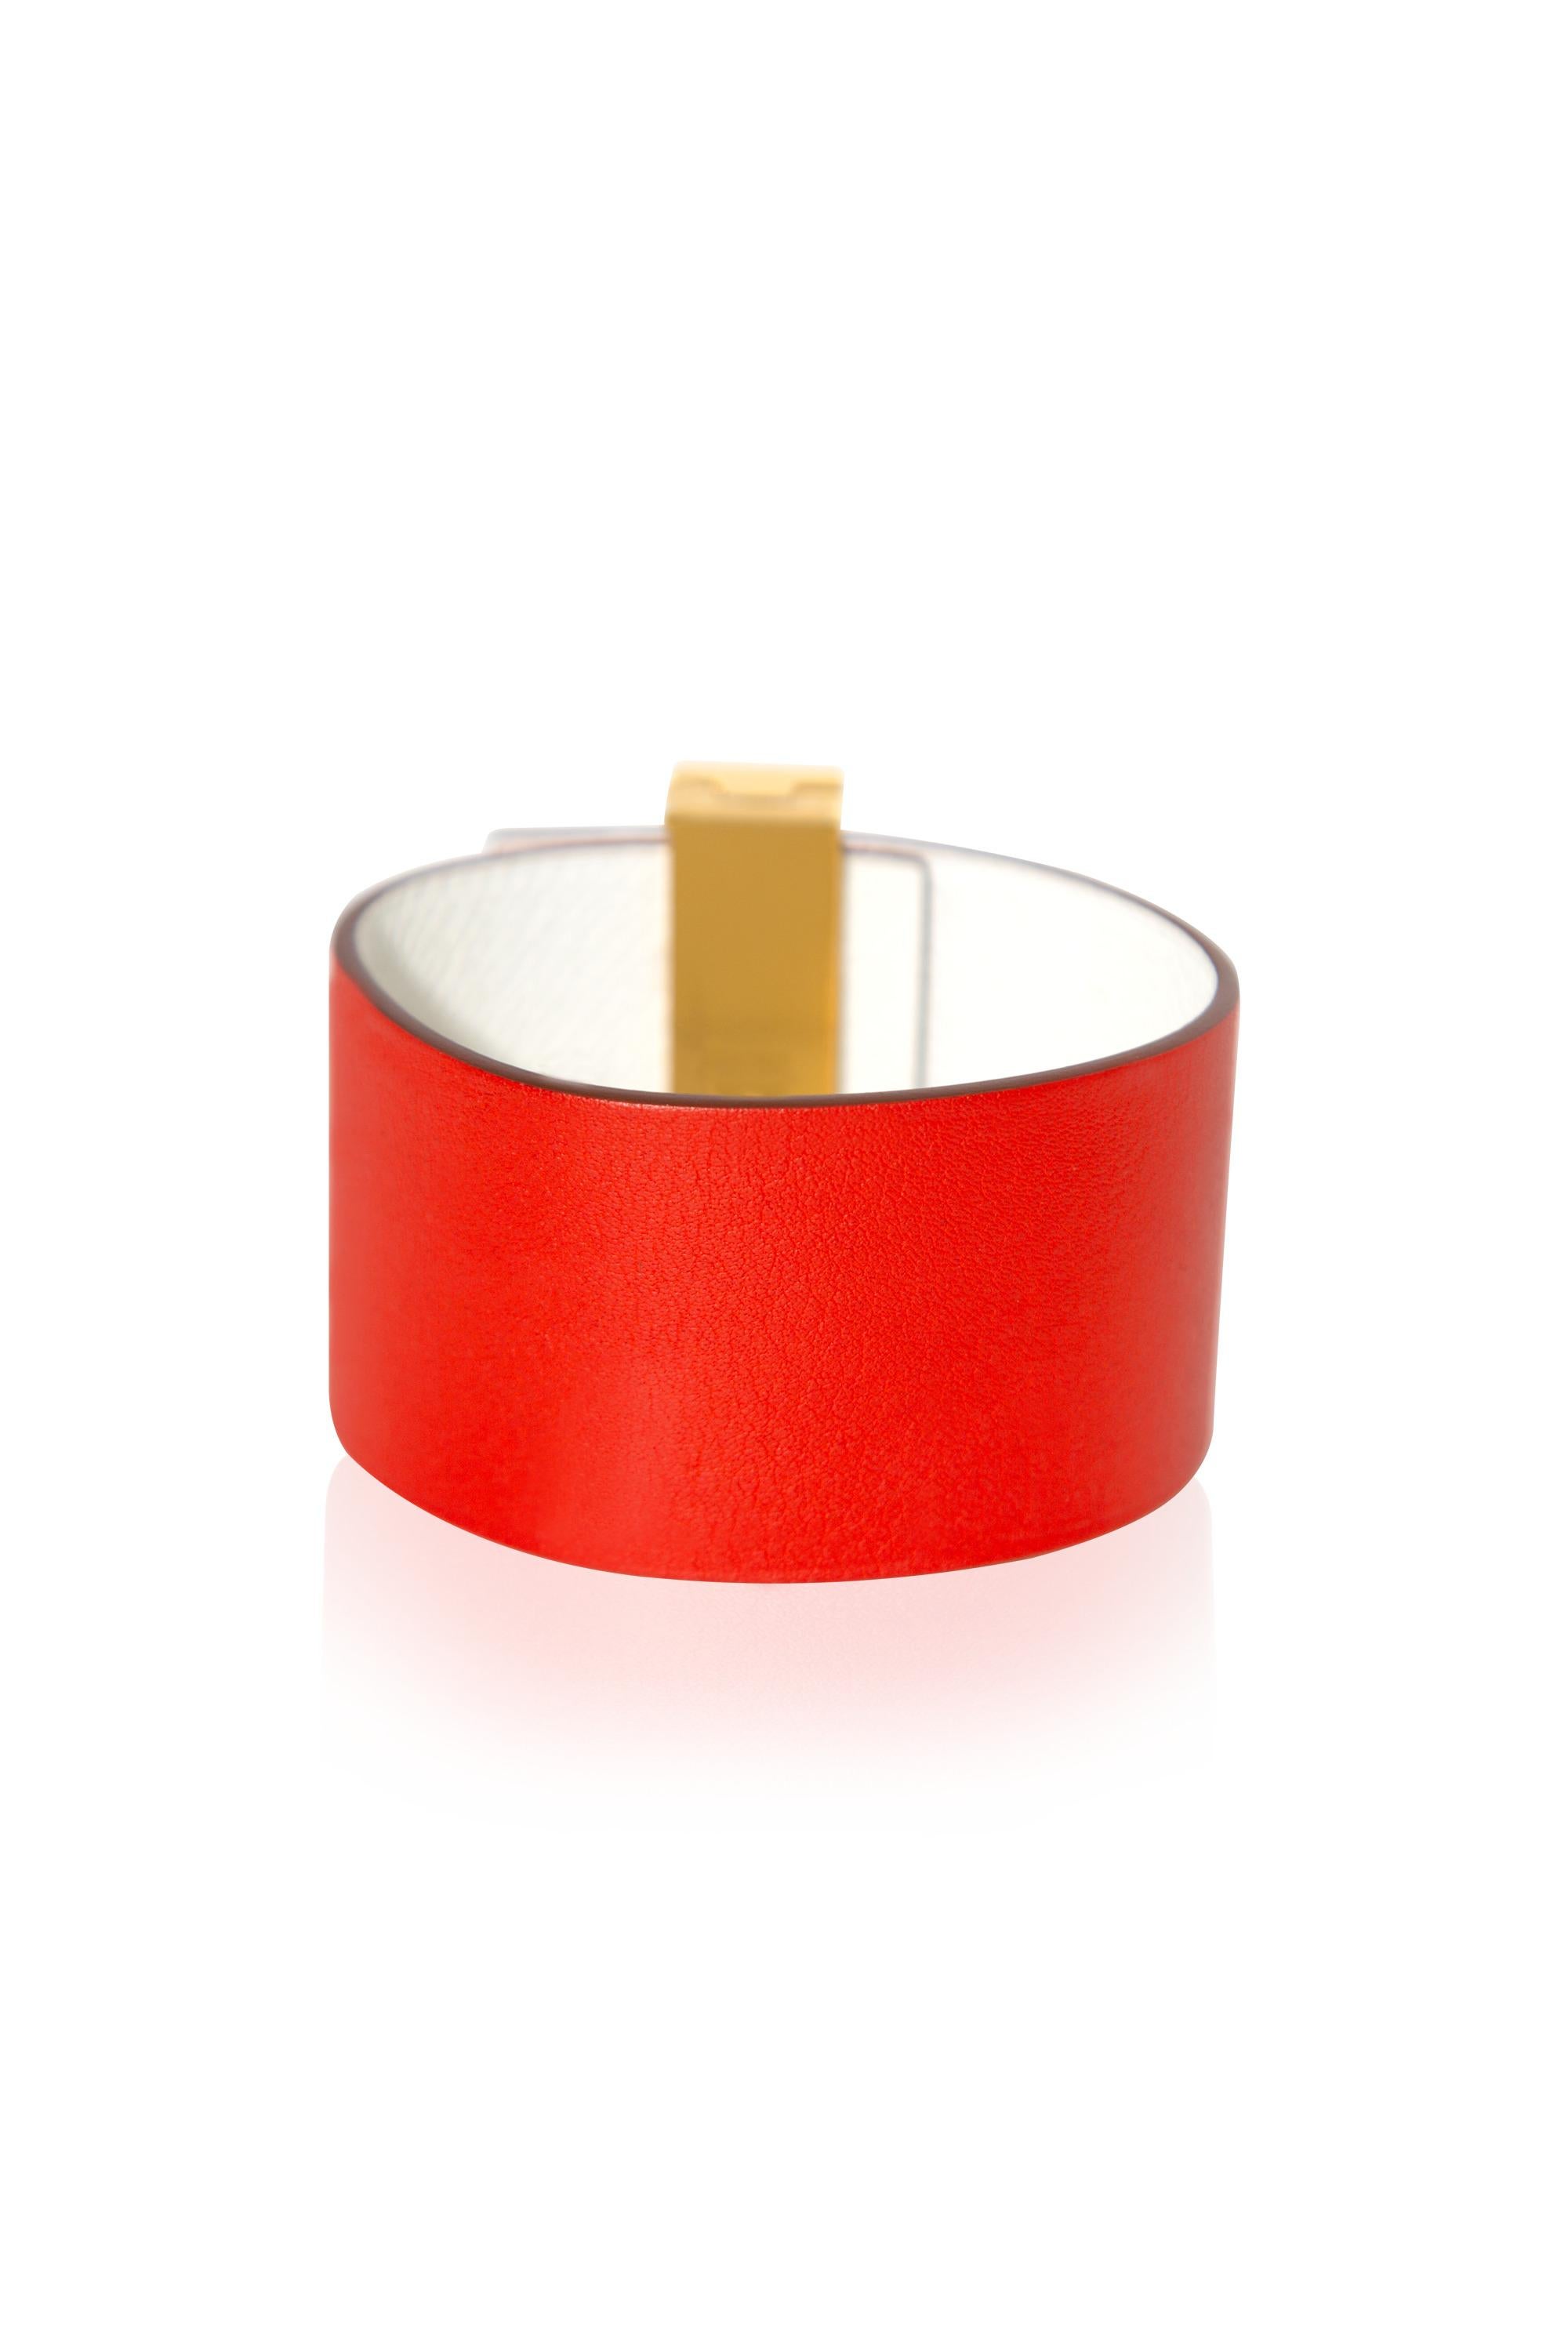 Hermès Bicolour Illusion Reversible Bracelet Capucine Red/White GHW In New Condition For Sale In London, GB